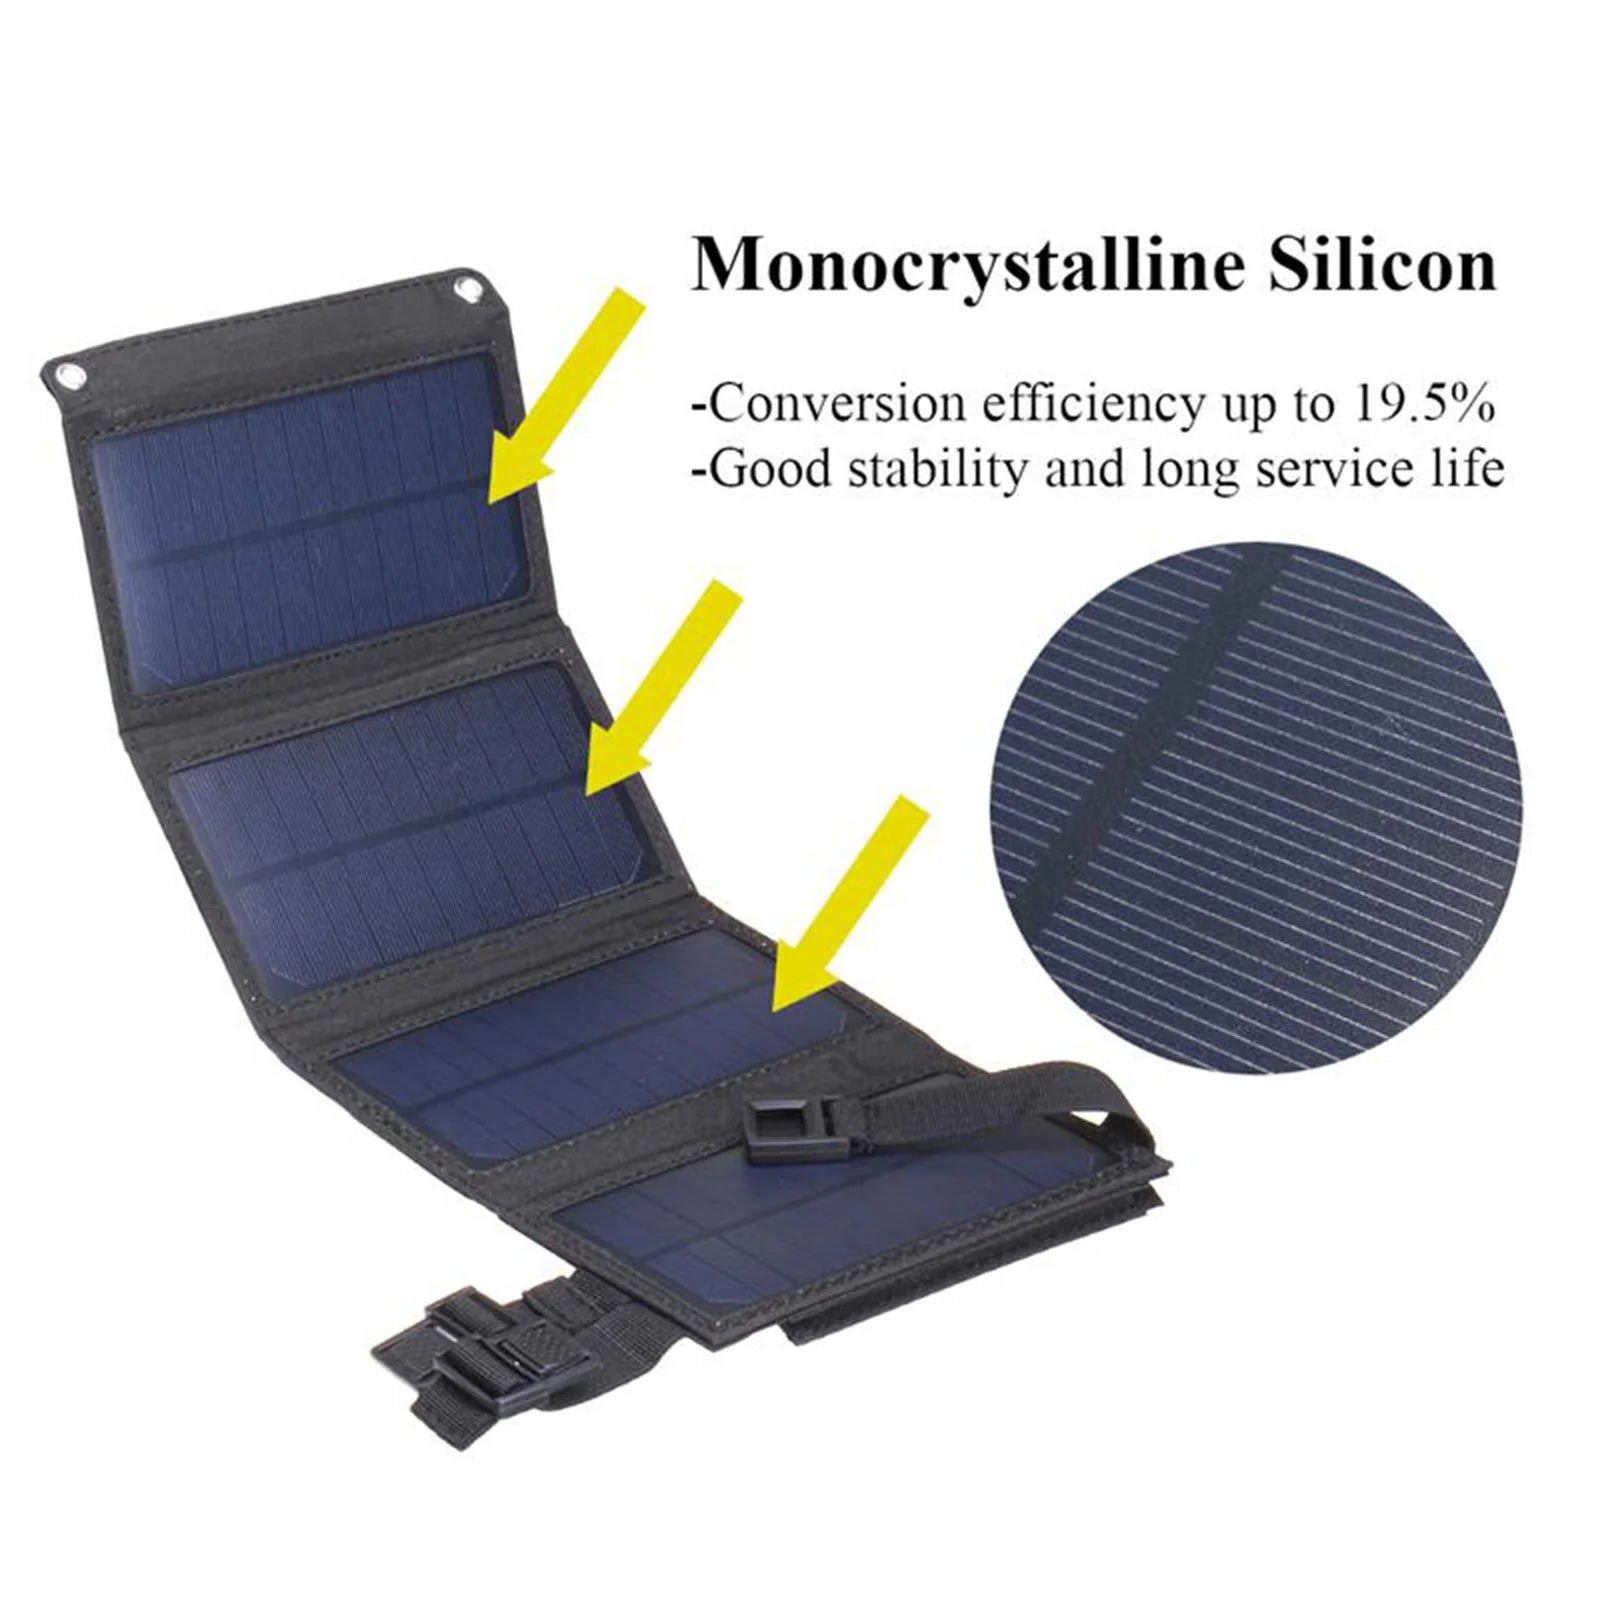 20W Outdoor Foldable Solar Panel, High-efficiency solar panels with 19.5% conversion rate for reliable energy production.